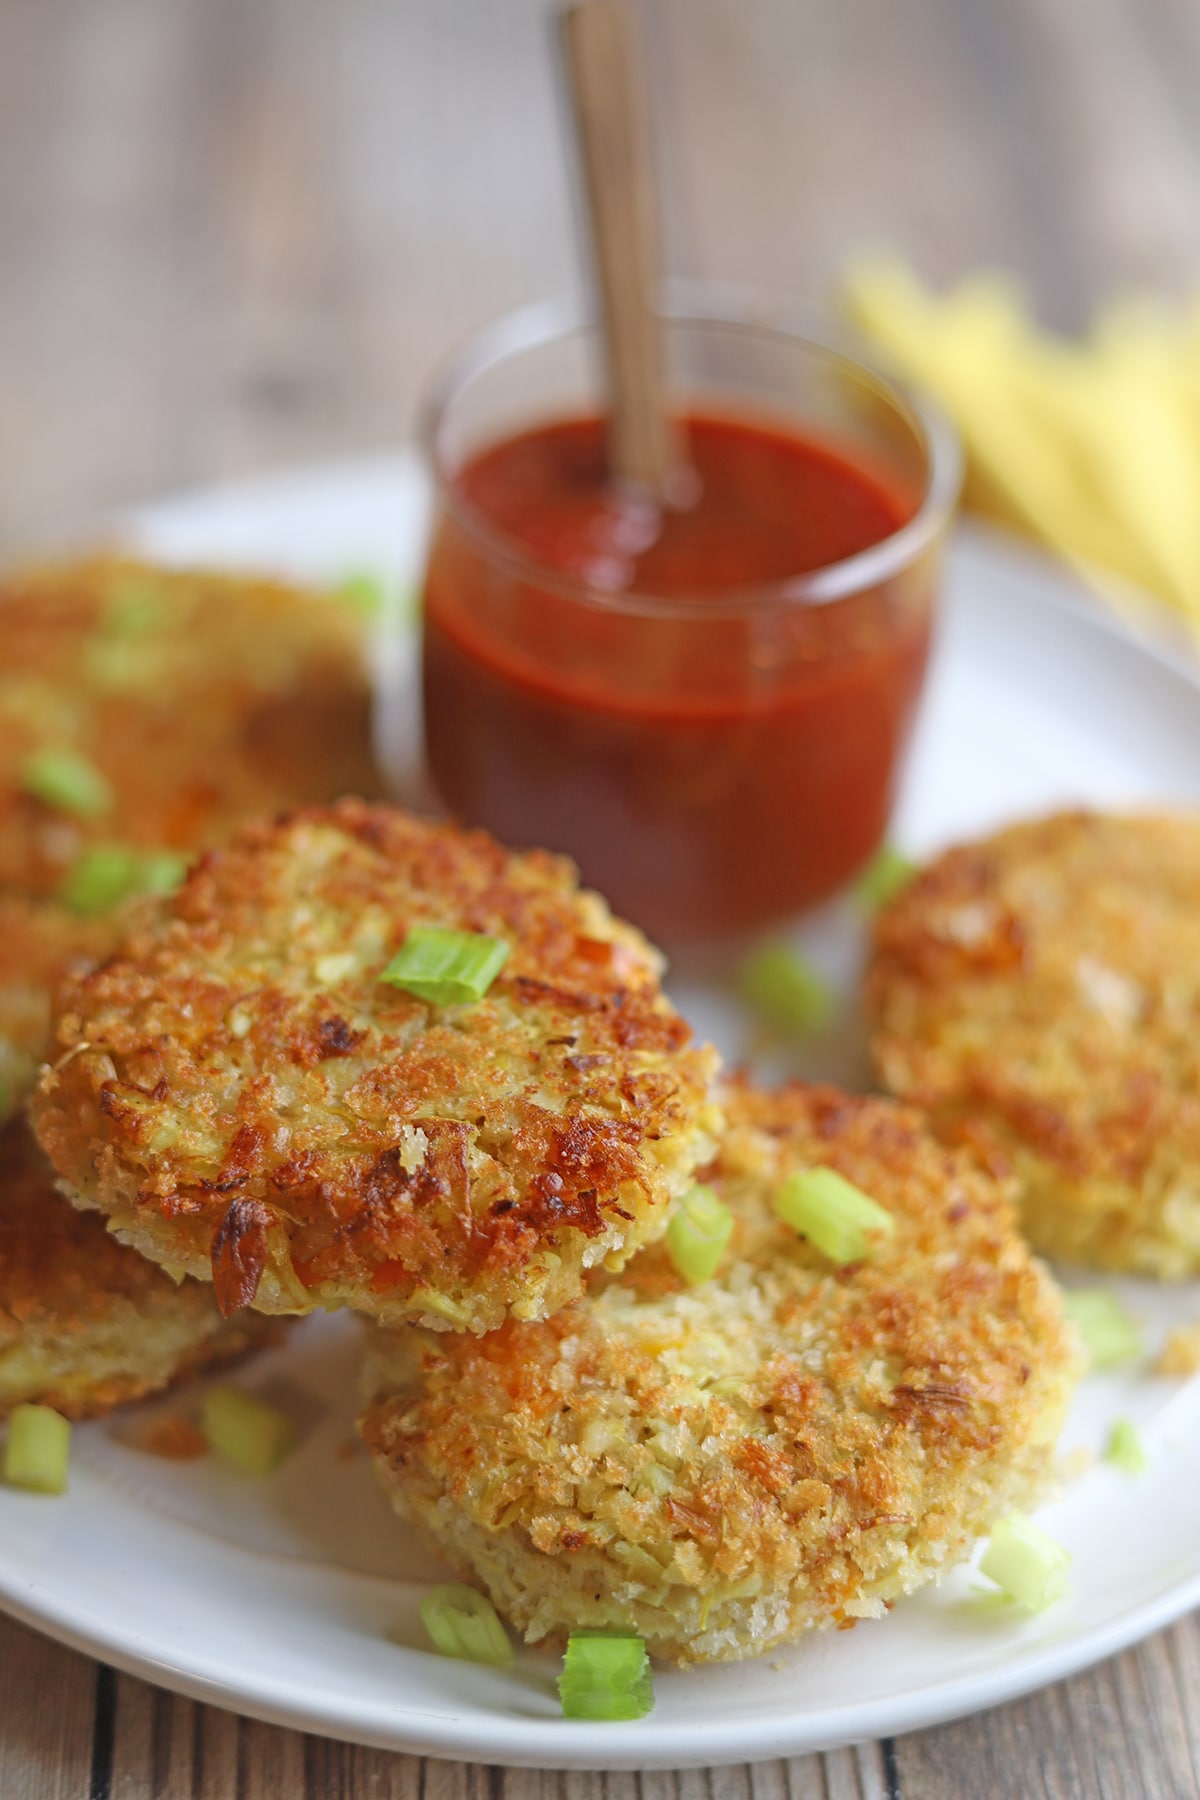 Vegan crab cakes on platter by cocktail sauce.